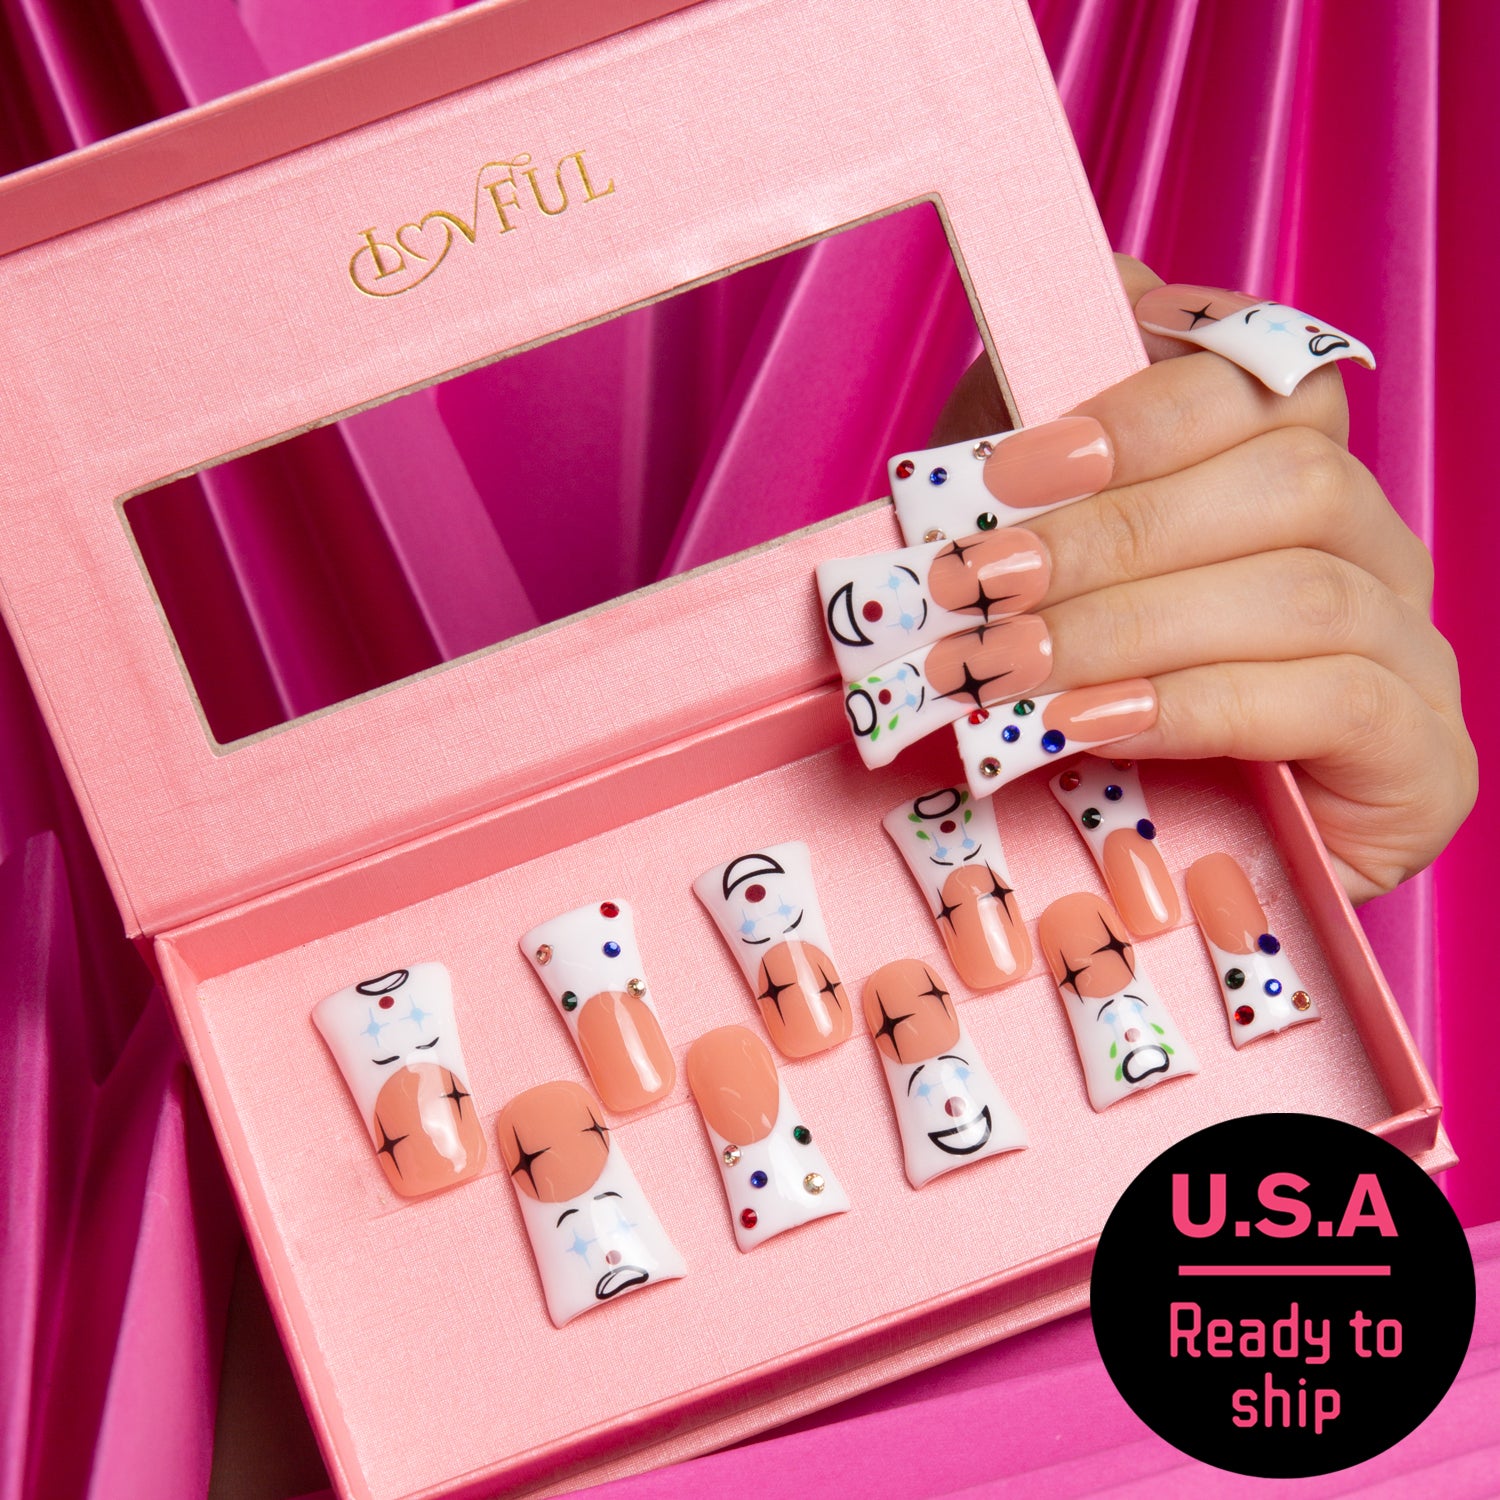 Lovful.com Circus Clown-themed press-on nails in a pink box with fun clown faces and colorful polka dot designs. U.S.A Ready to ship.